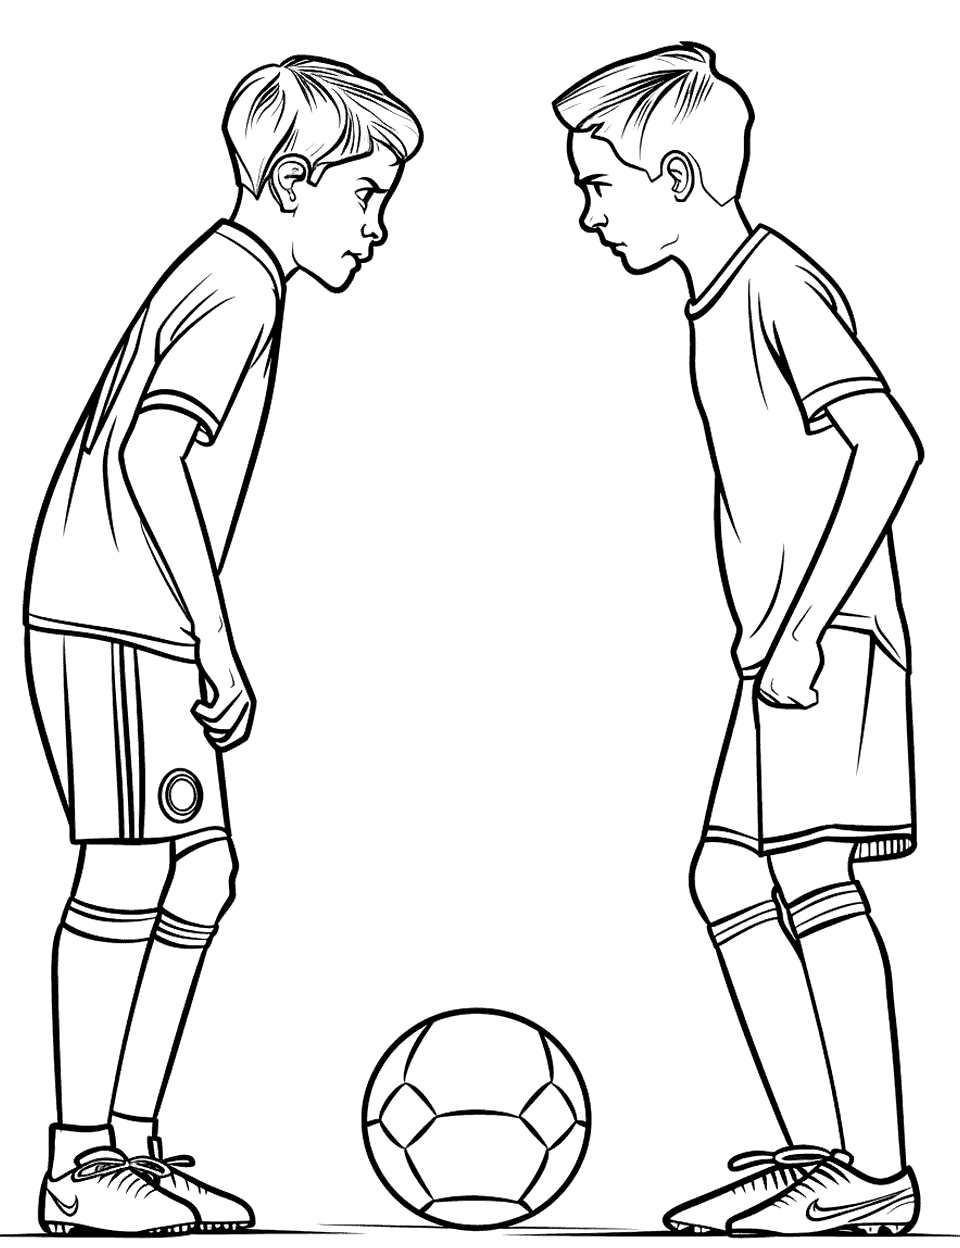 Face-Off Soccer Coloring Page - Two players facing off on the pitch.